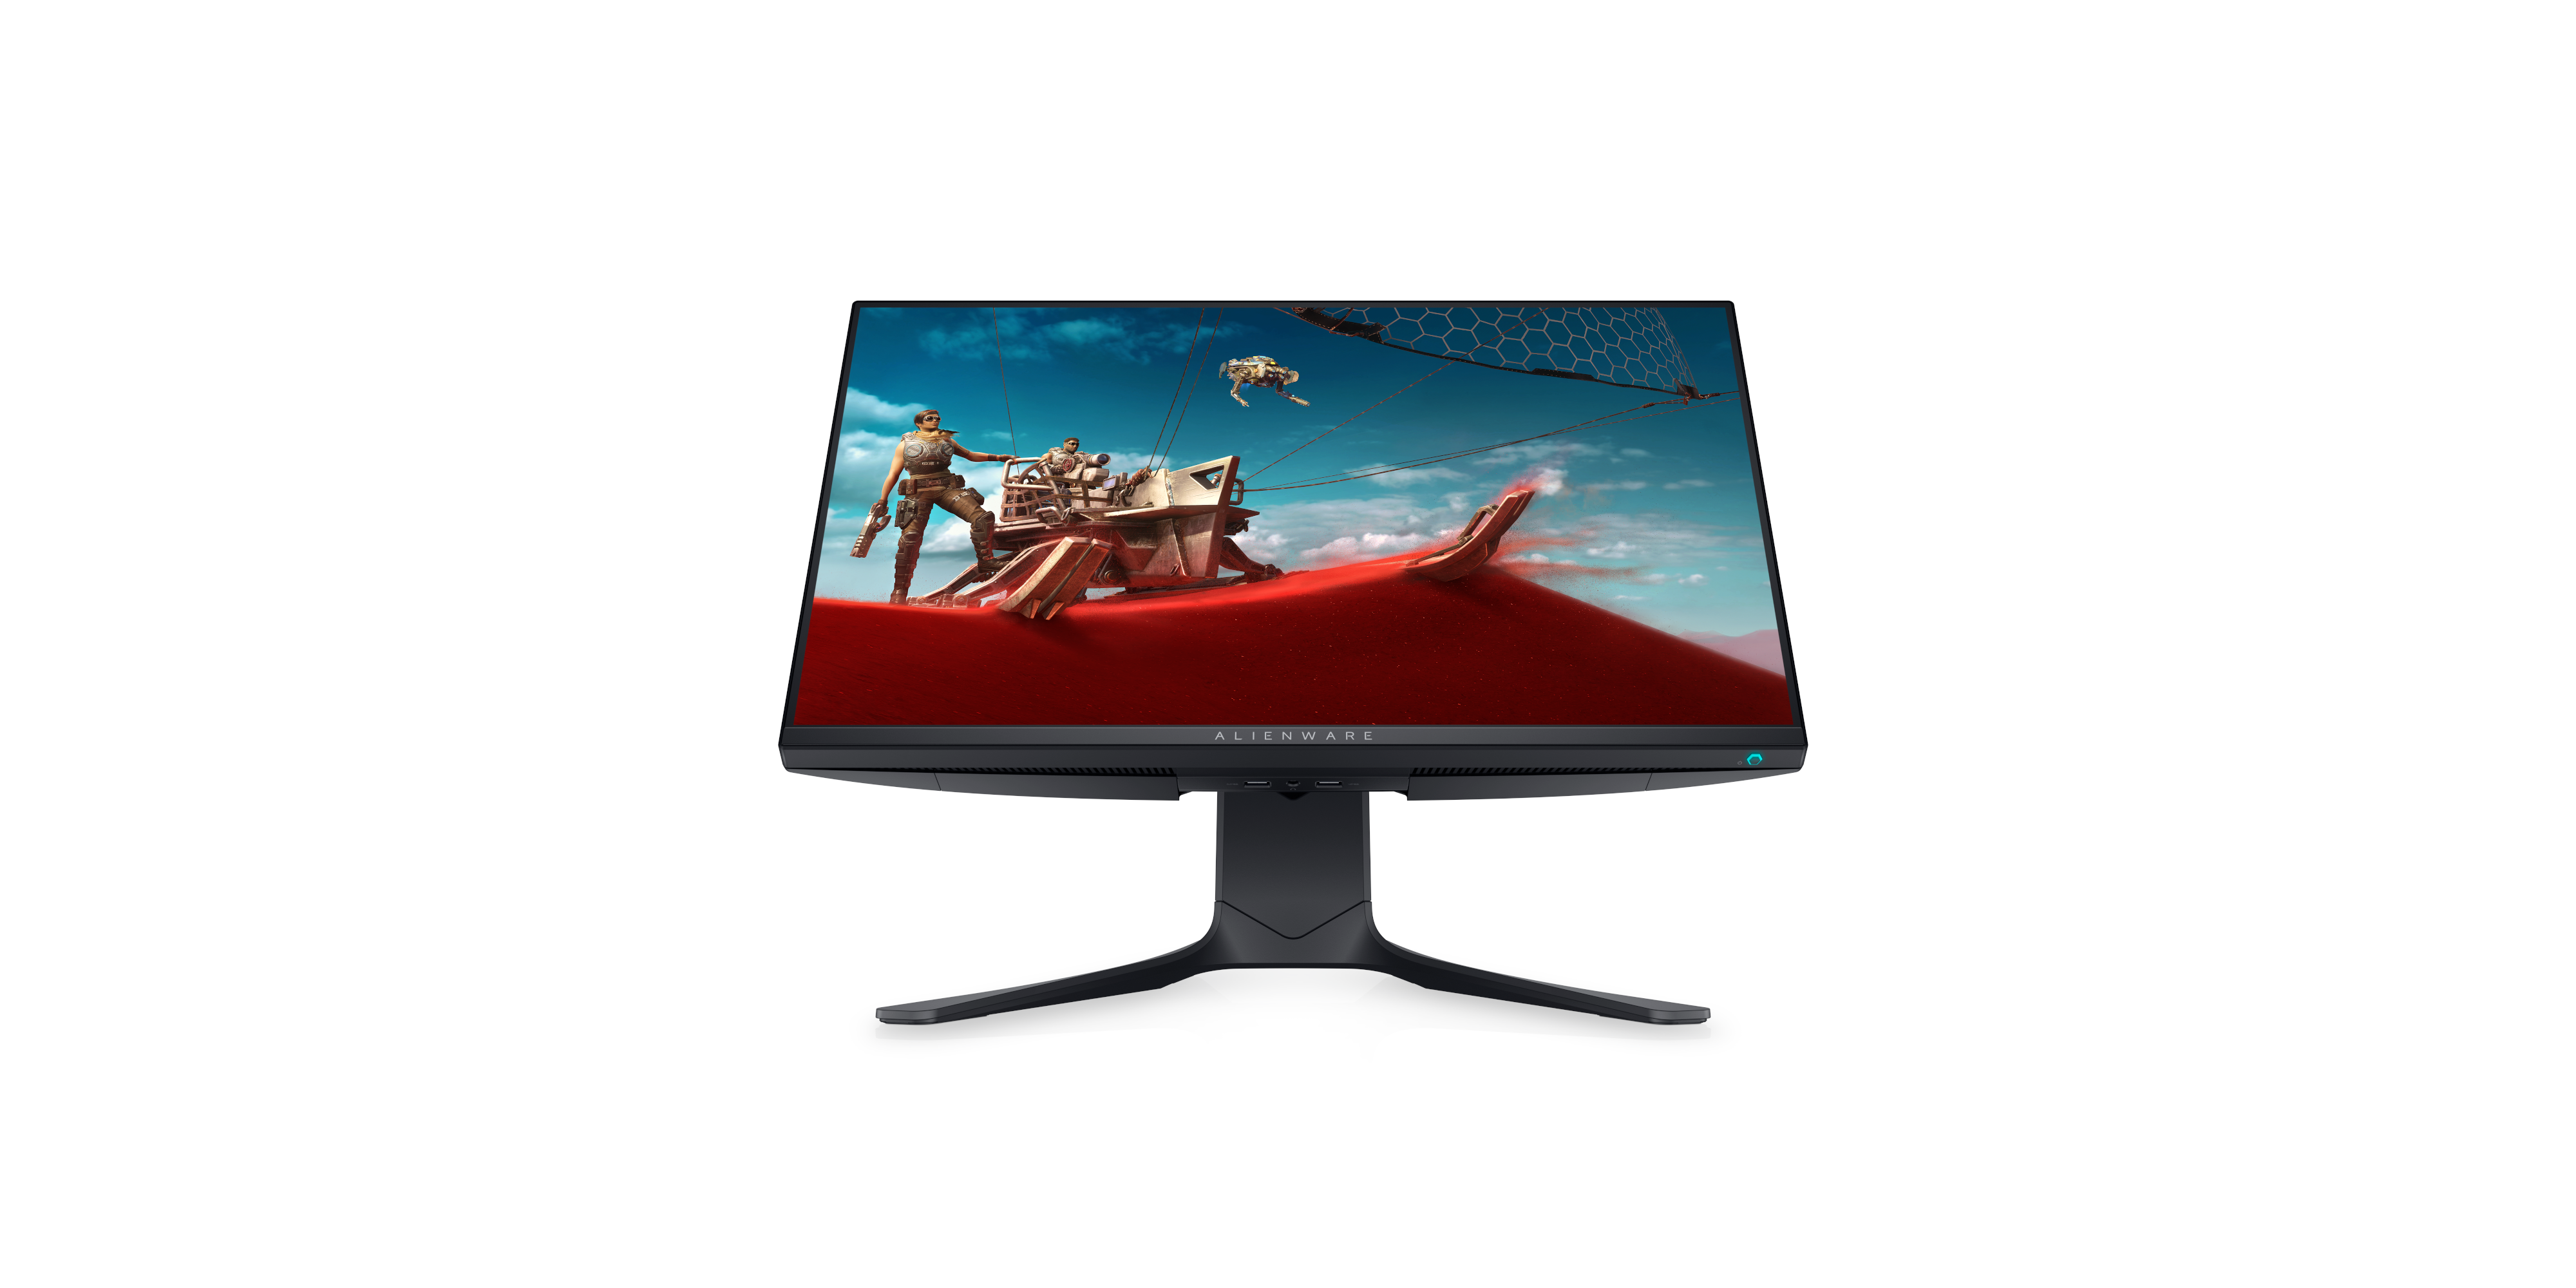 Dell S 240hz Ips Gaming Monitor Announced Alienware 25 Aw2521hf Blur Busters